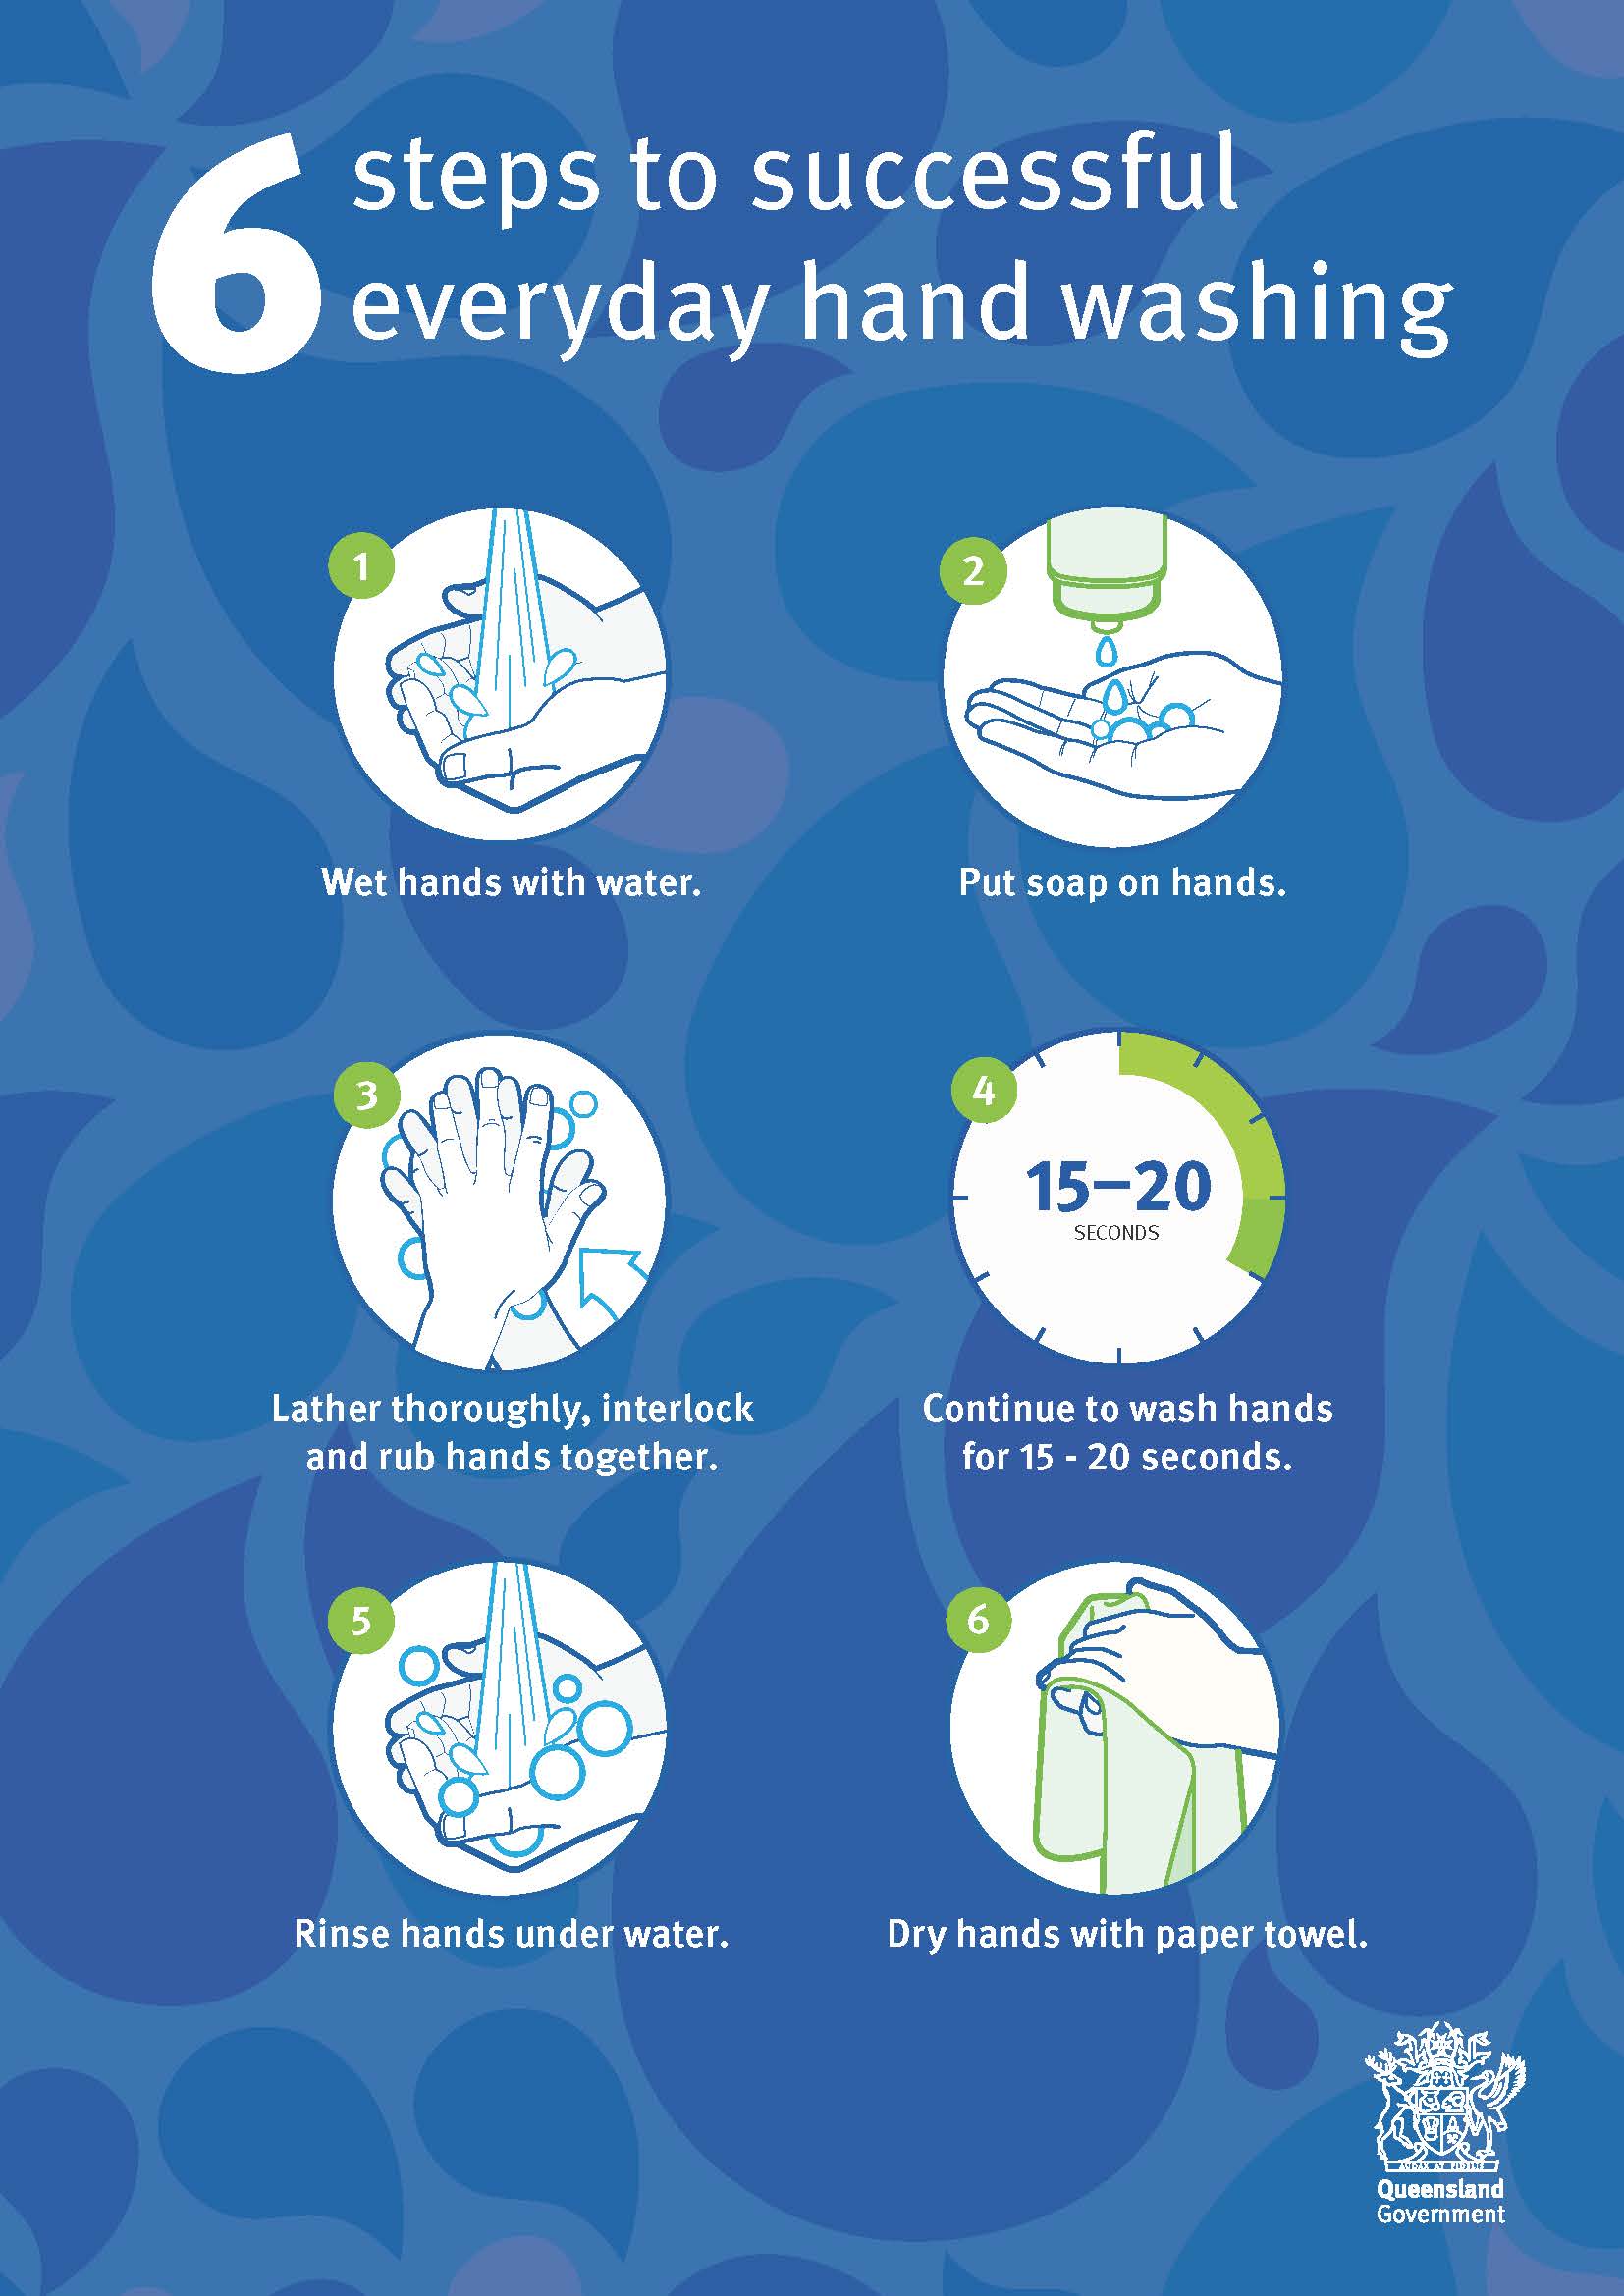 Handwashing 6 step guide | Health and wellbeing | Queensland Government